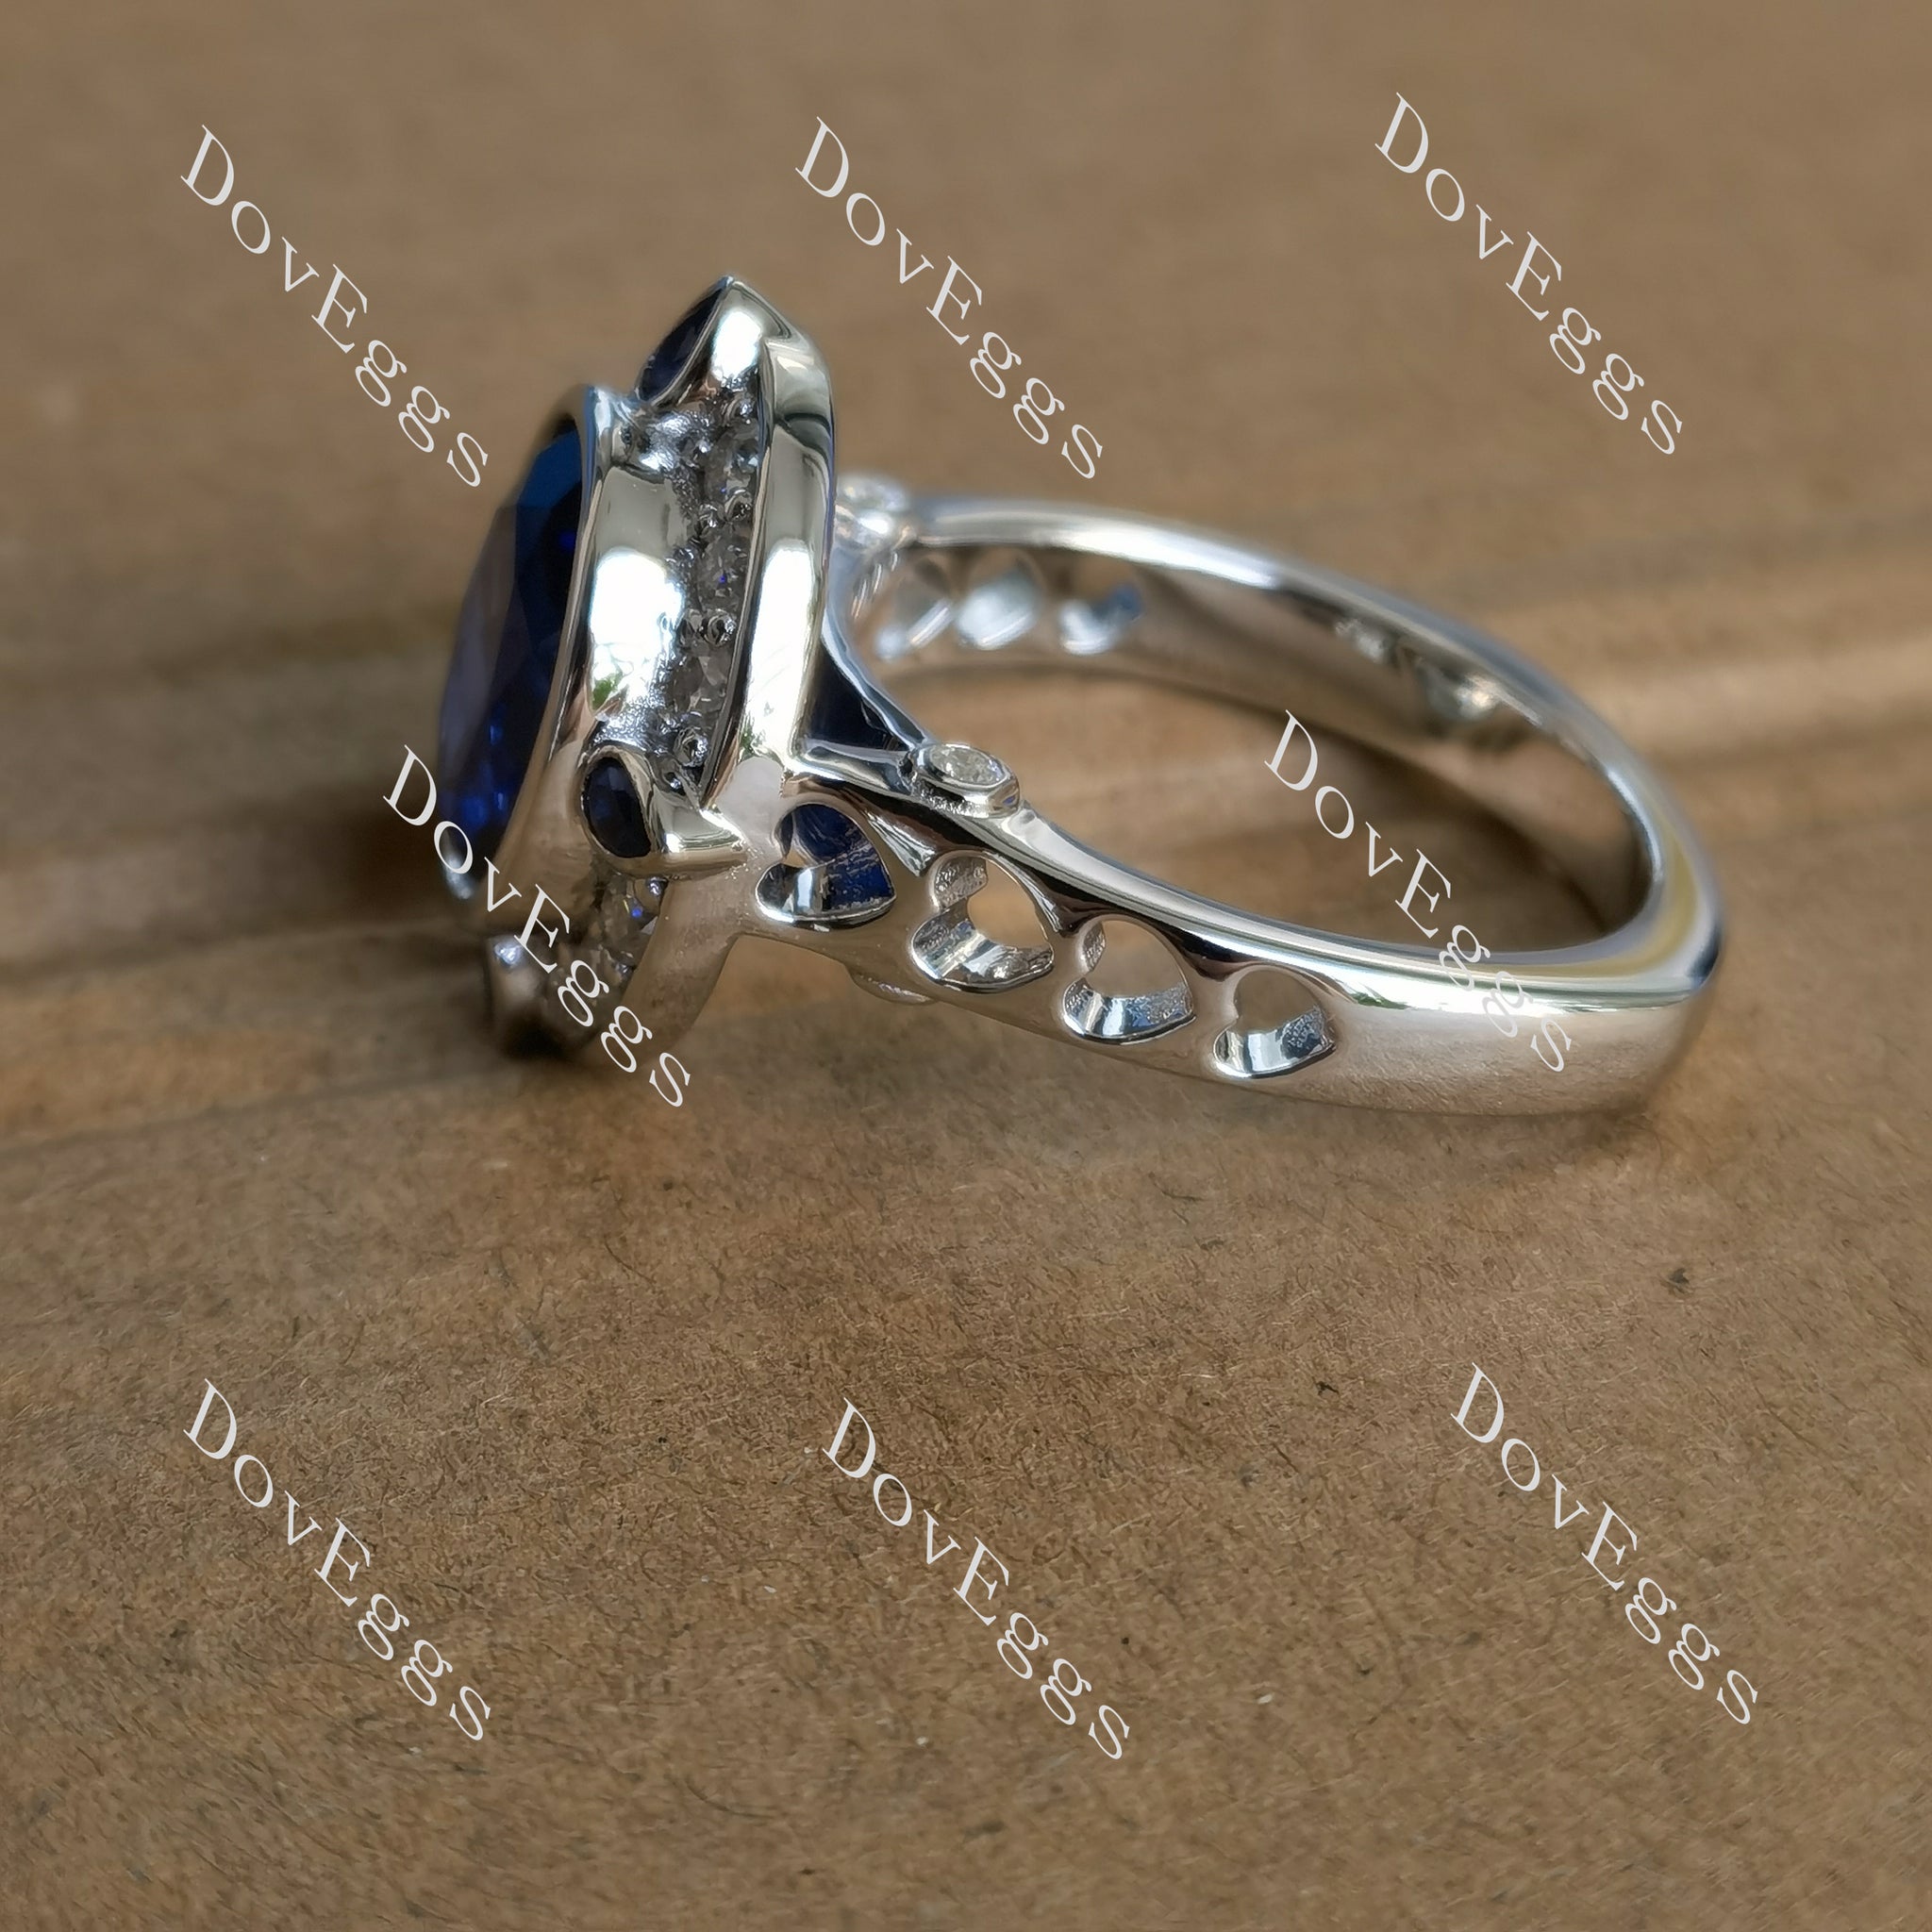 Torey oval halo blue sapphire colored gem & moissanite ring